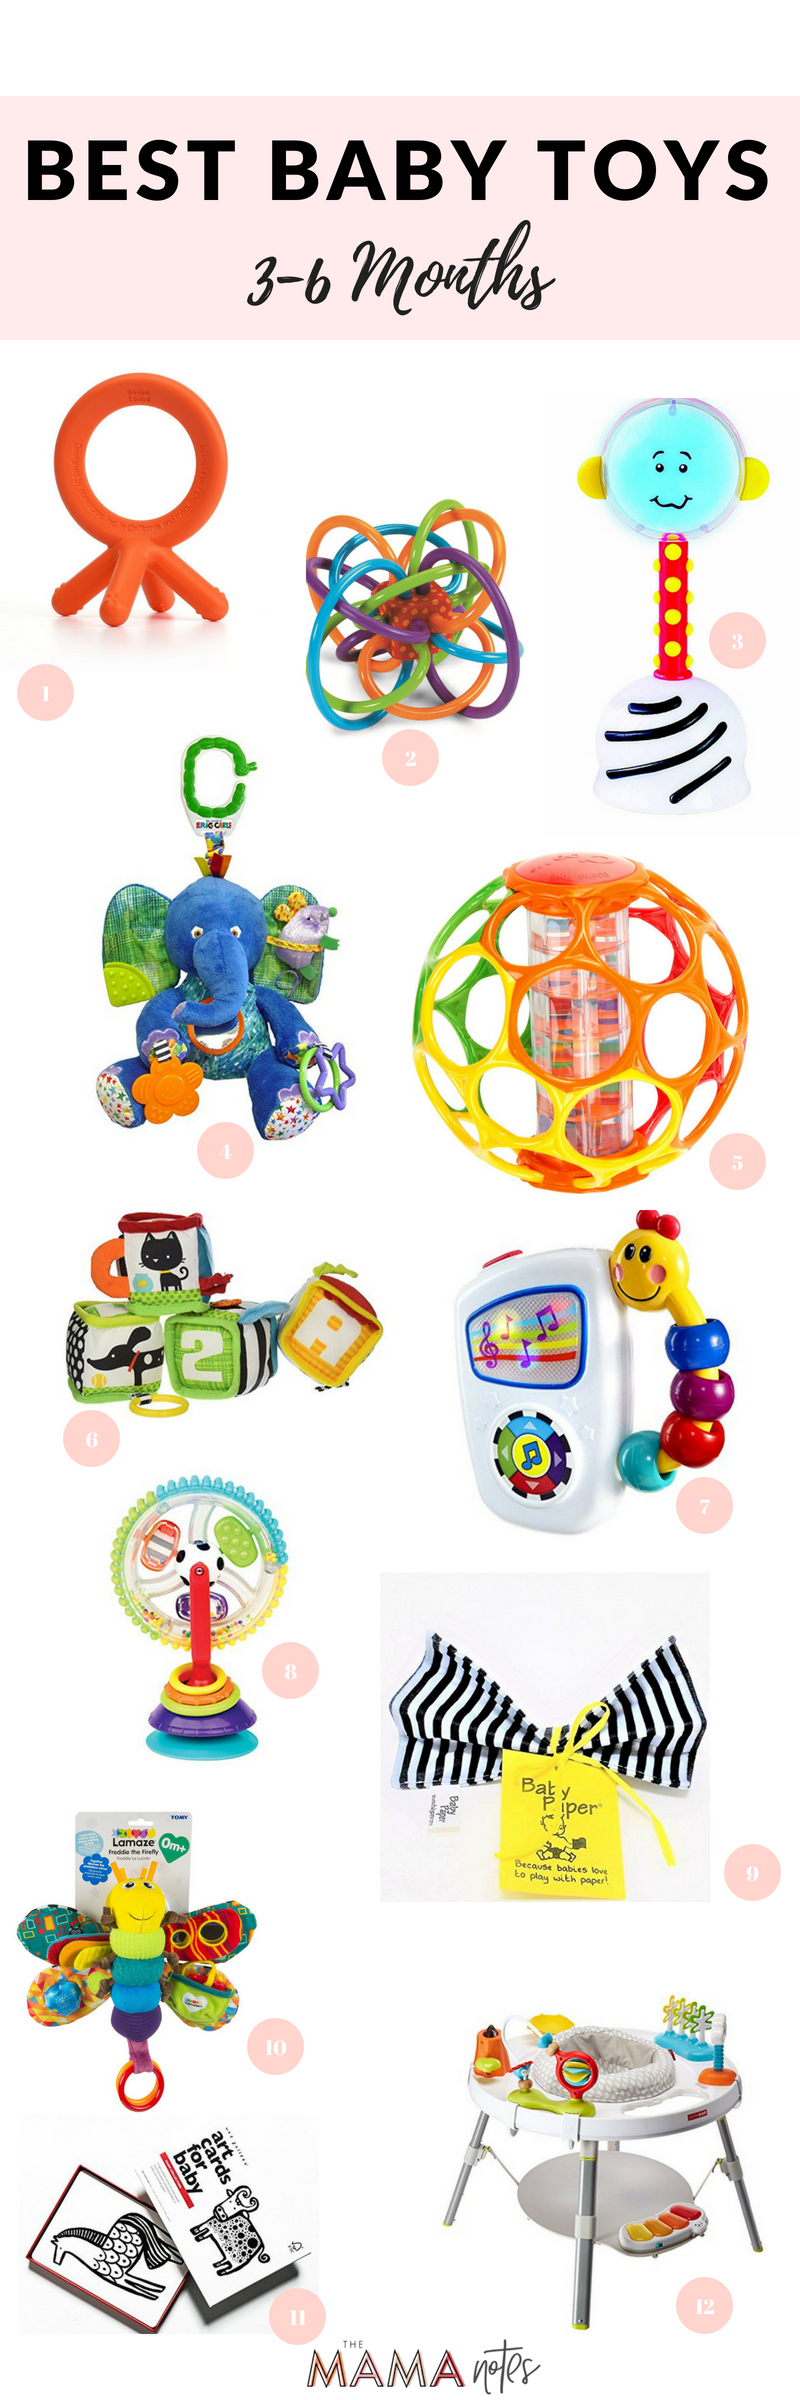 toys for under 6 months